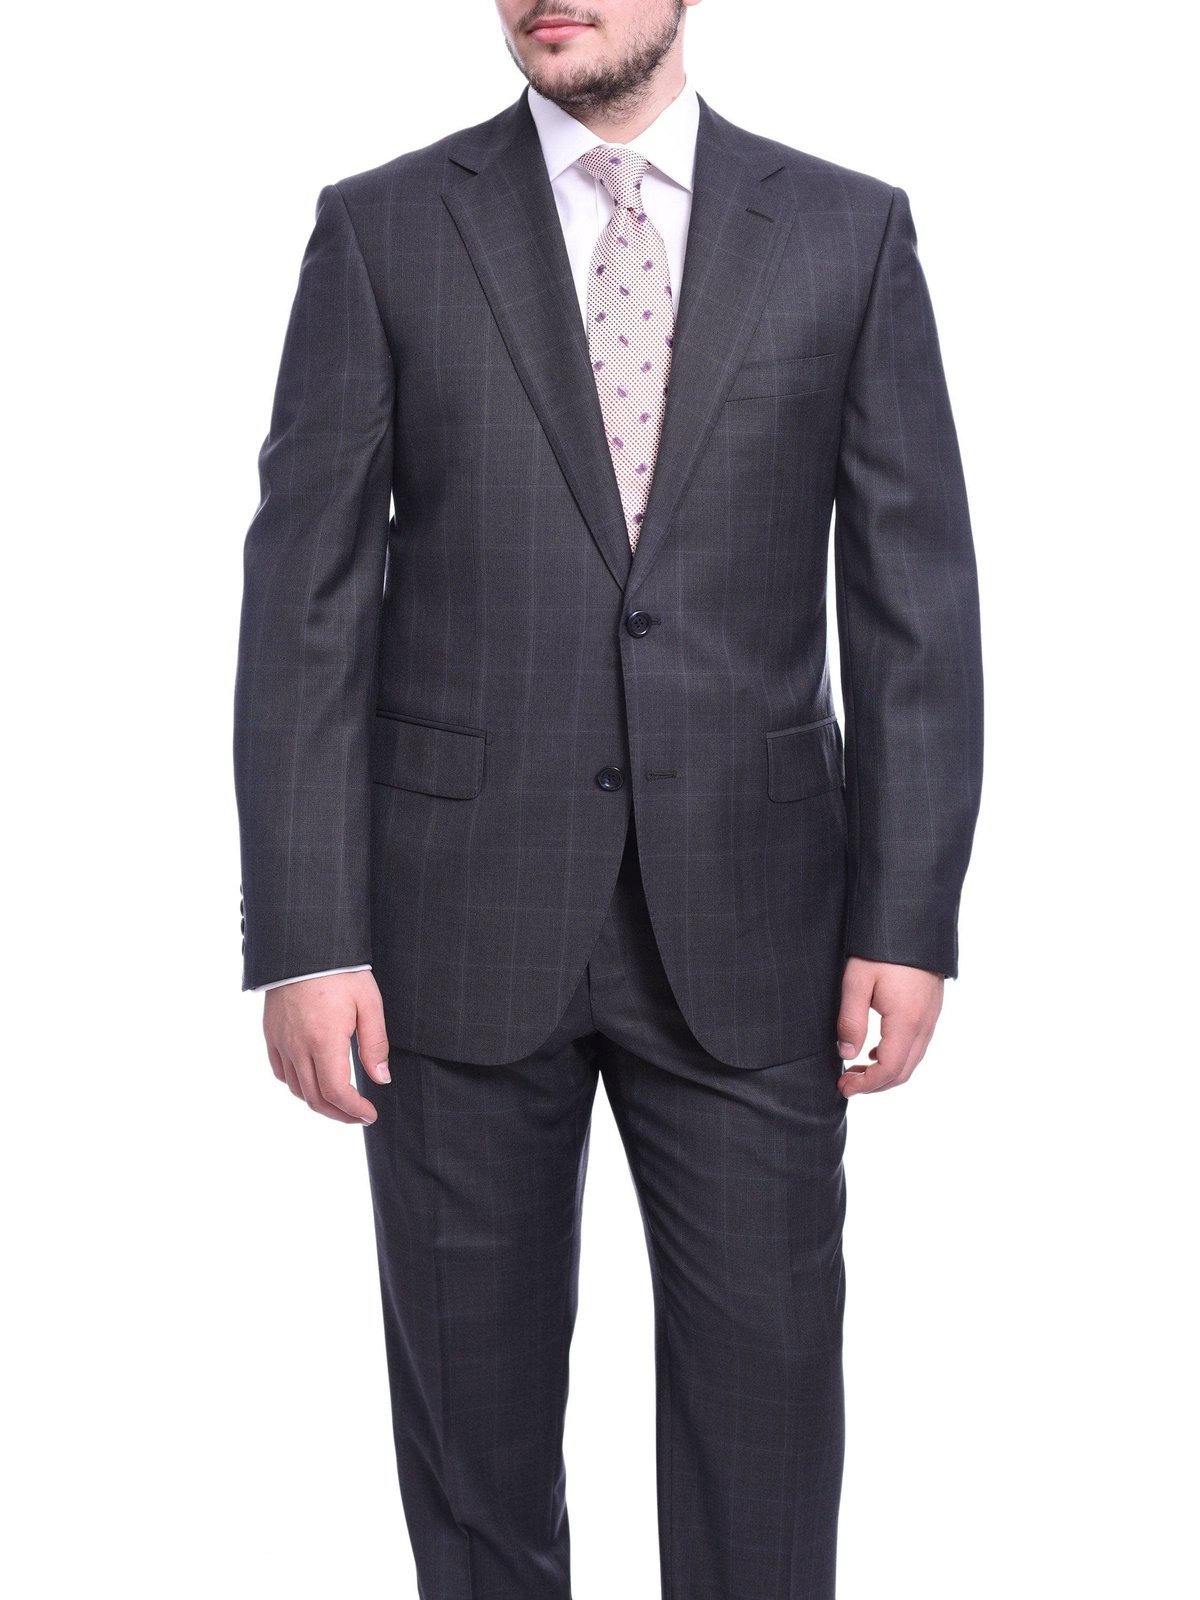 Napoli TWO PIECE SUITS Napoli Classic Fit Gray Windowpane Plaid Half Canvassed Reda Wool Suit